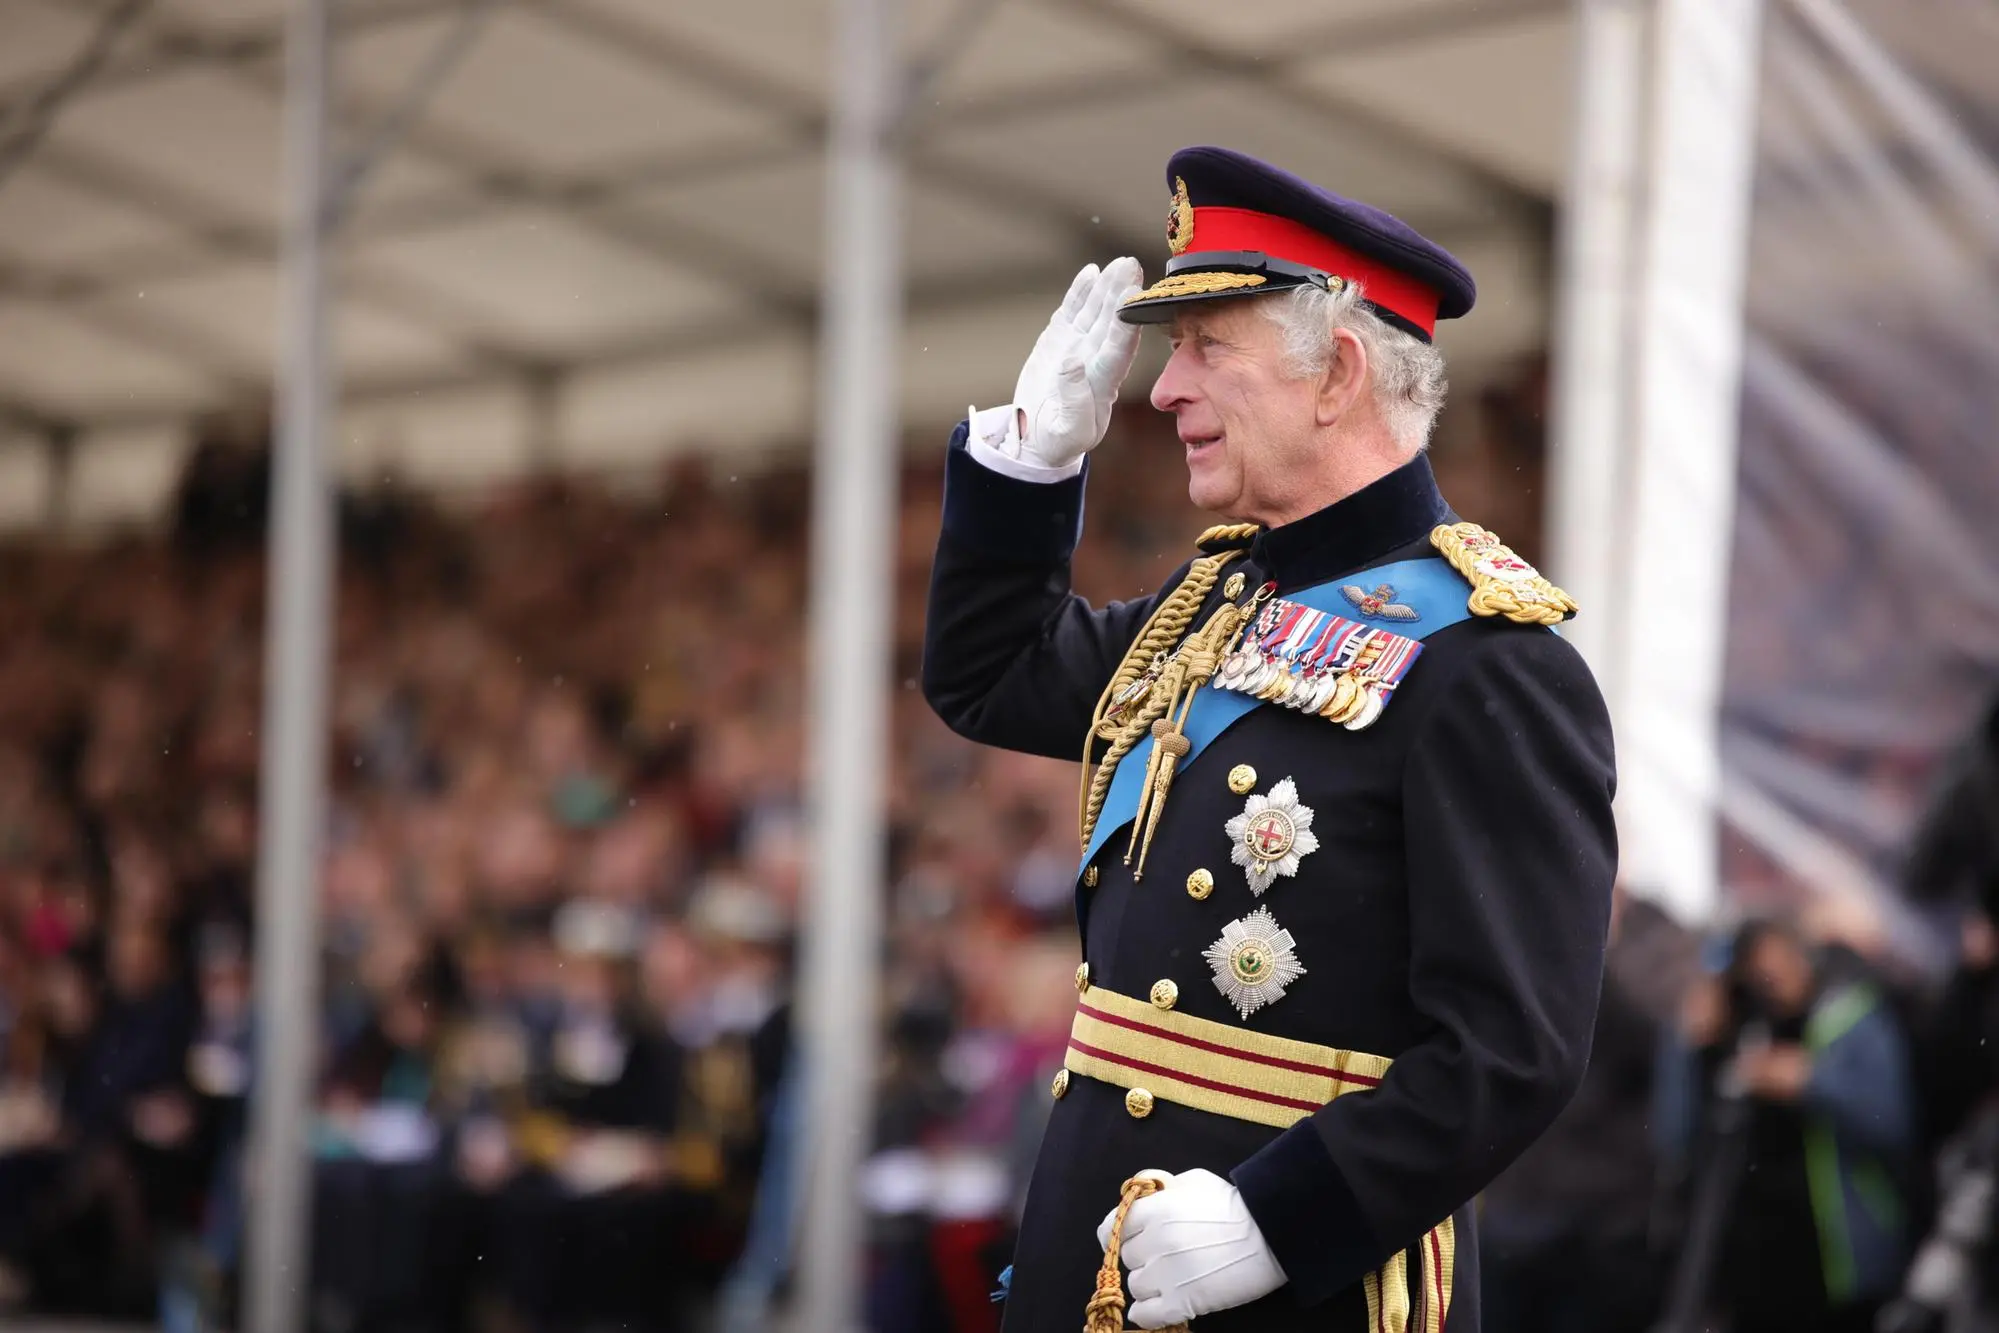 epa10572354 A handout picture provided by the British Ministry of Defence (MoD) shows his Majesty, King Charles III, saluting to staff and cadets at the Royal Military Academy in Sandhurst, Britain, 14 April 2023. The Sovereign's visit to Sandhurst marked the 200th anniversary of the Academy’s Commissioning Parade, and included the 40,000th Officer Cadet to pass out from the academy since 1947. His Majesty the King also presented new colours for the academy, bearing the new cypher of HM King Charles III. They represented the first set of military colours to be presented to the British Army bearing the new Sovereign's 'CRIII' cypher. EPA/Sgt Donald C Todd/MoD/HANDOUT MANDATORY CREDIT: MOD/CROWN COPYRIGHT HANDOUT EDITORIAL USE ONLY/NO SALES